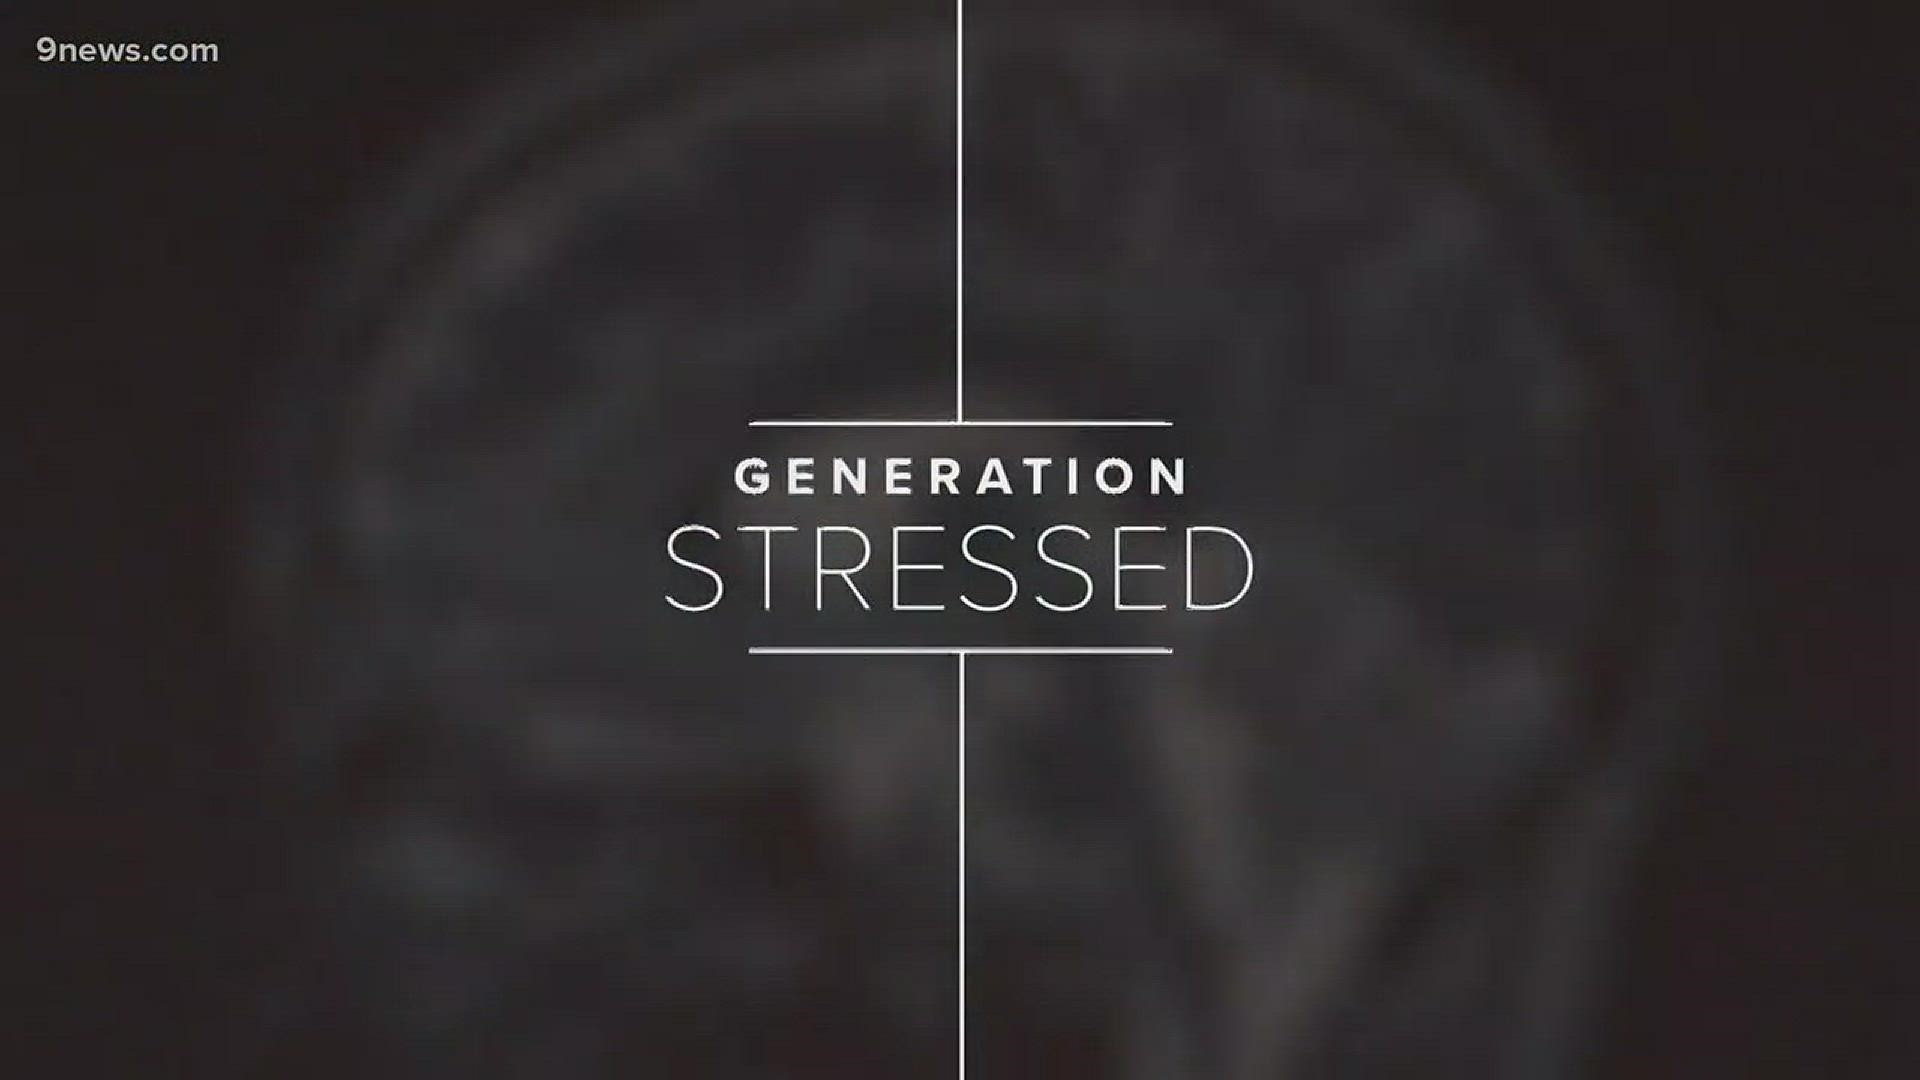 The bigger stress for Generation X is being overlooked - and it's true millenials and Baby Boomers are picked more for promotions. But our own Dr. Max is coming in to talk about what happened - and is happening.